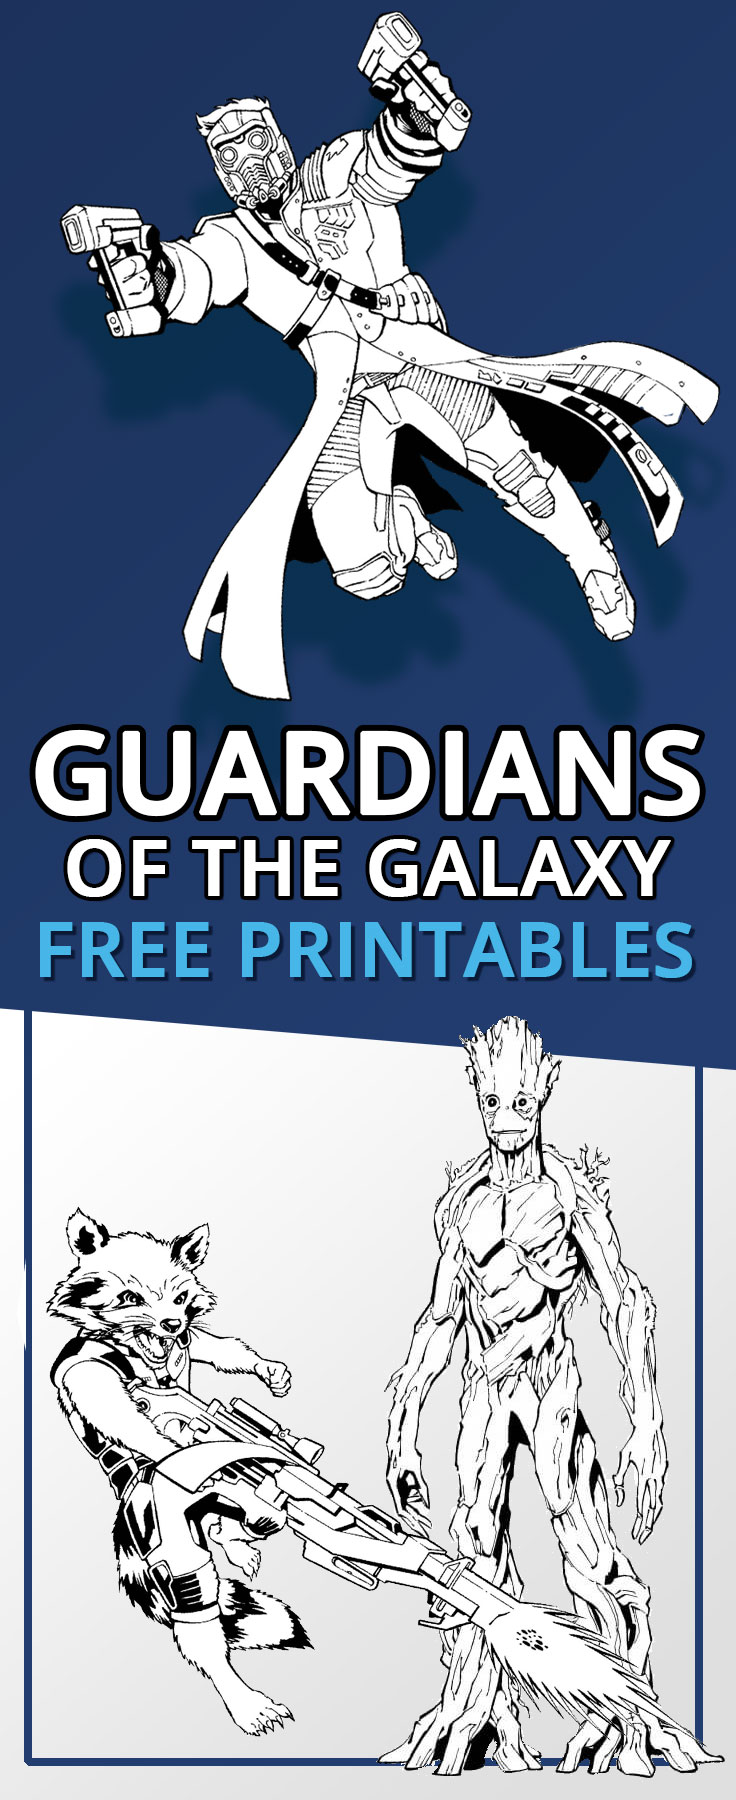 Guardians of FREE printables the Galaxy